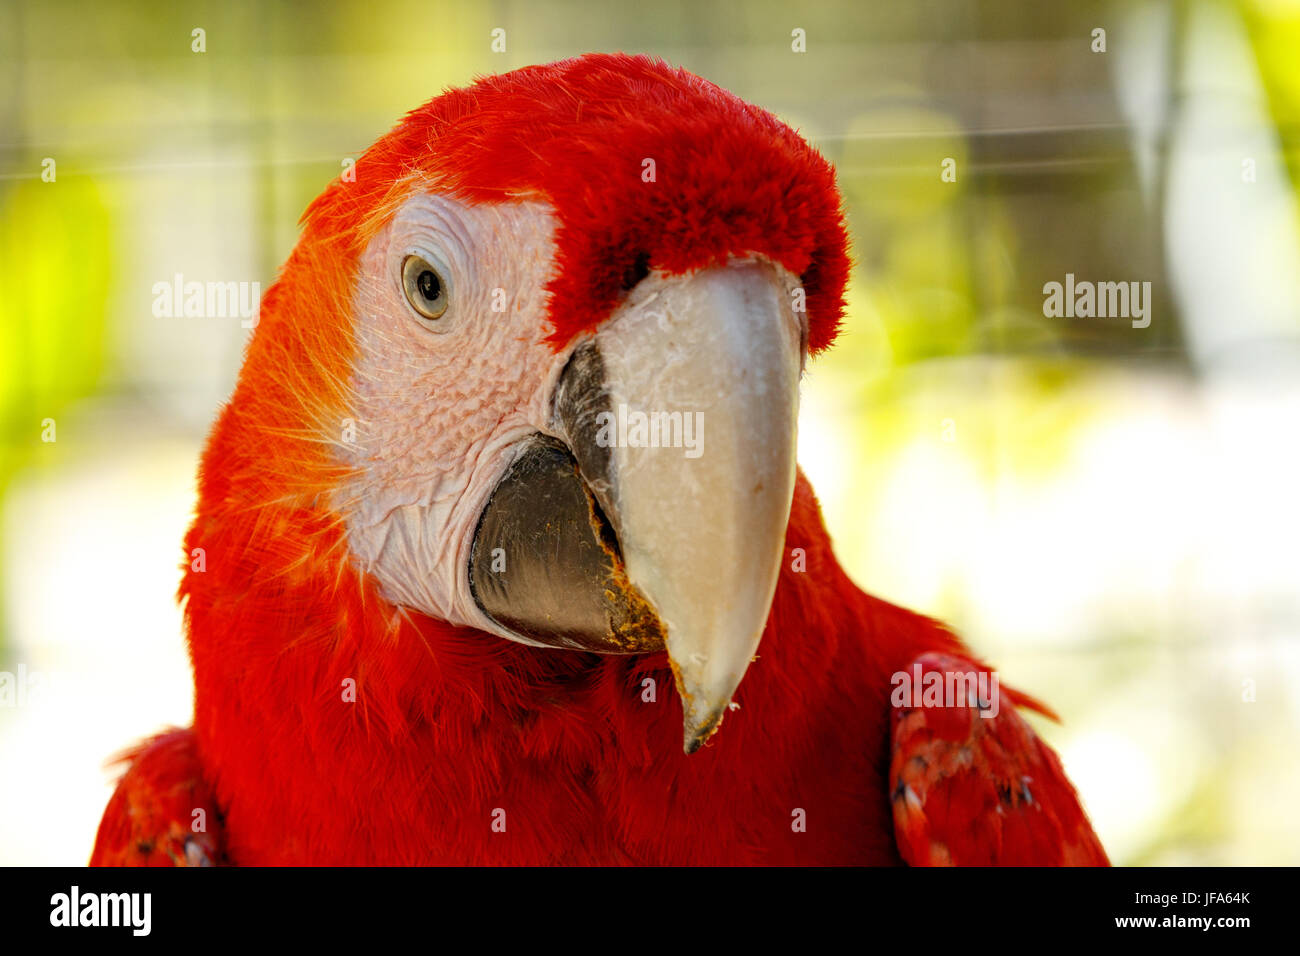 Red Parrot Stock Photo